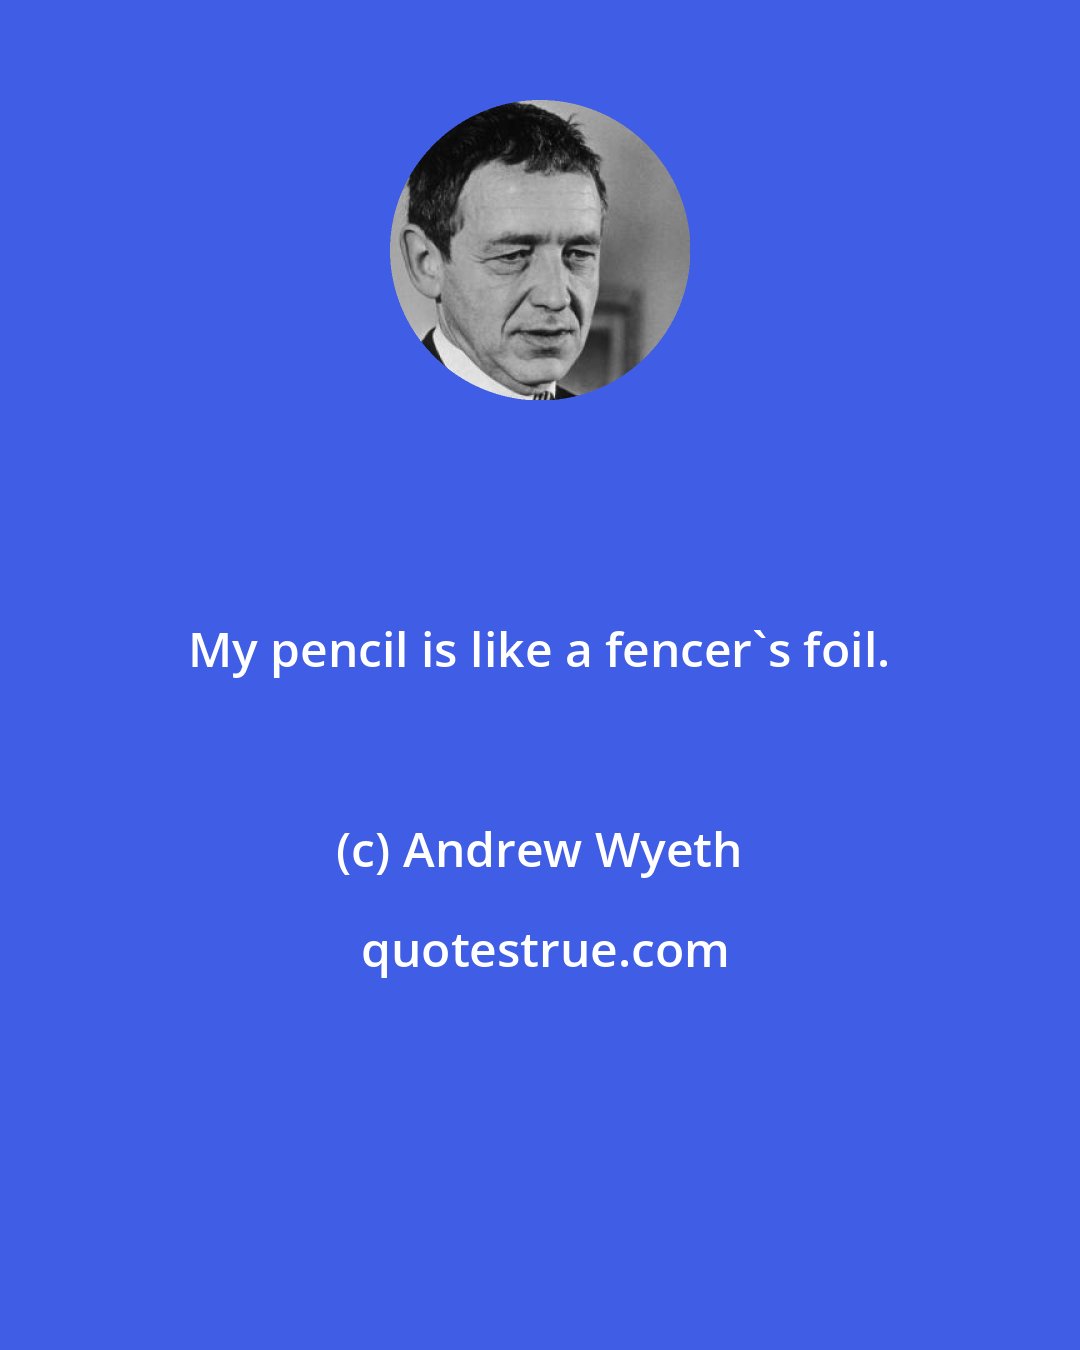 Andrew Wyeth: My pencil is like a fencer's foil.